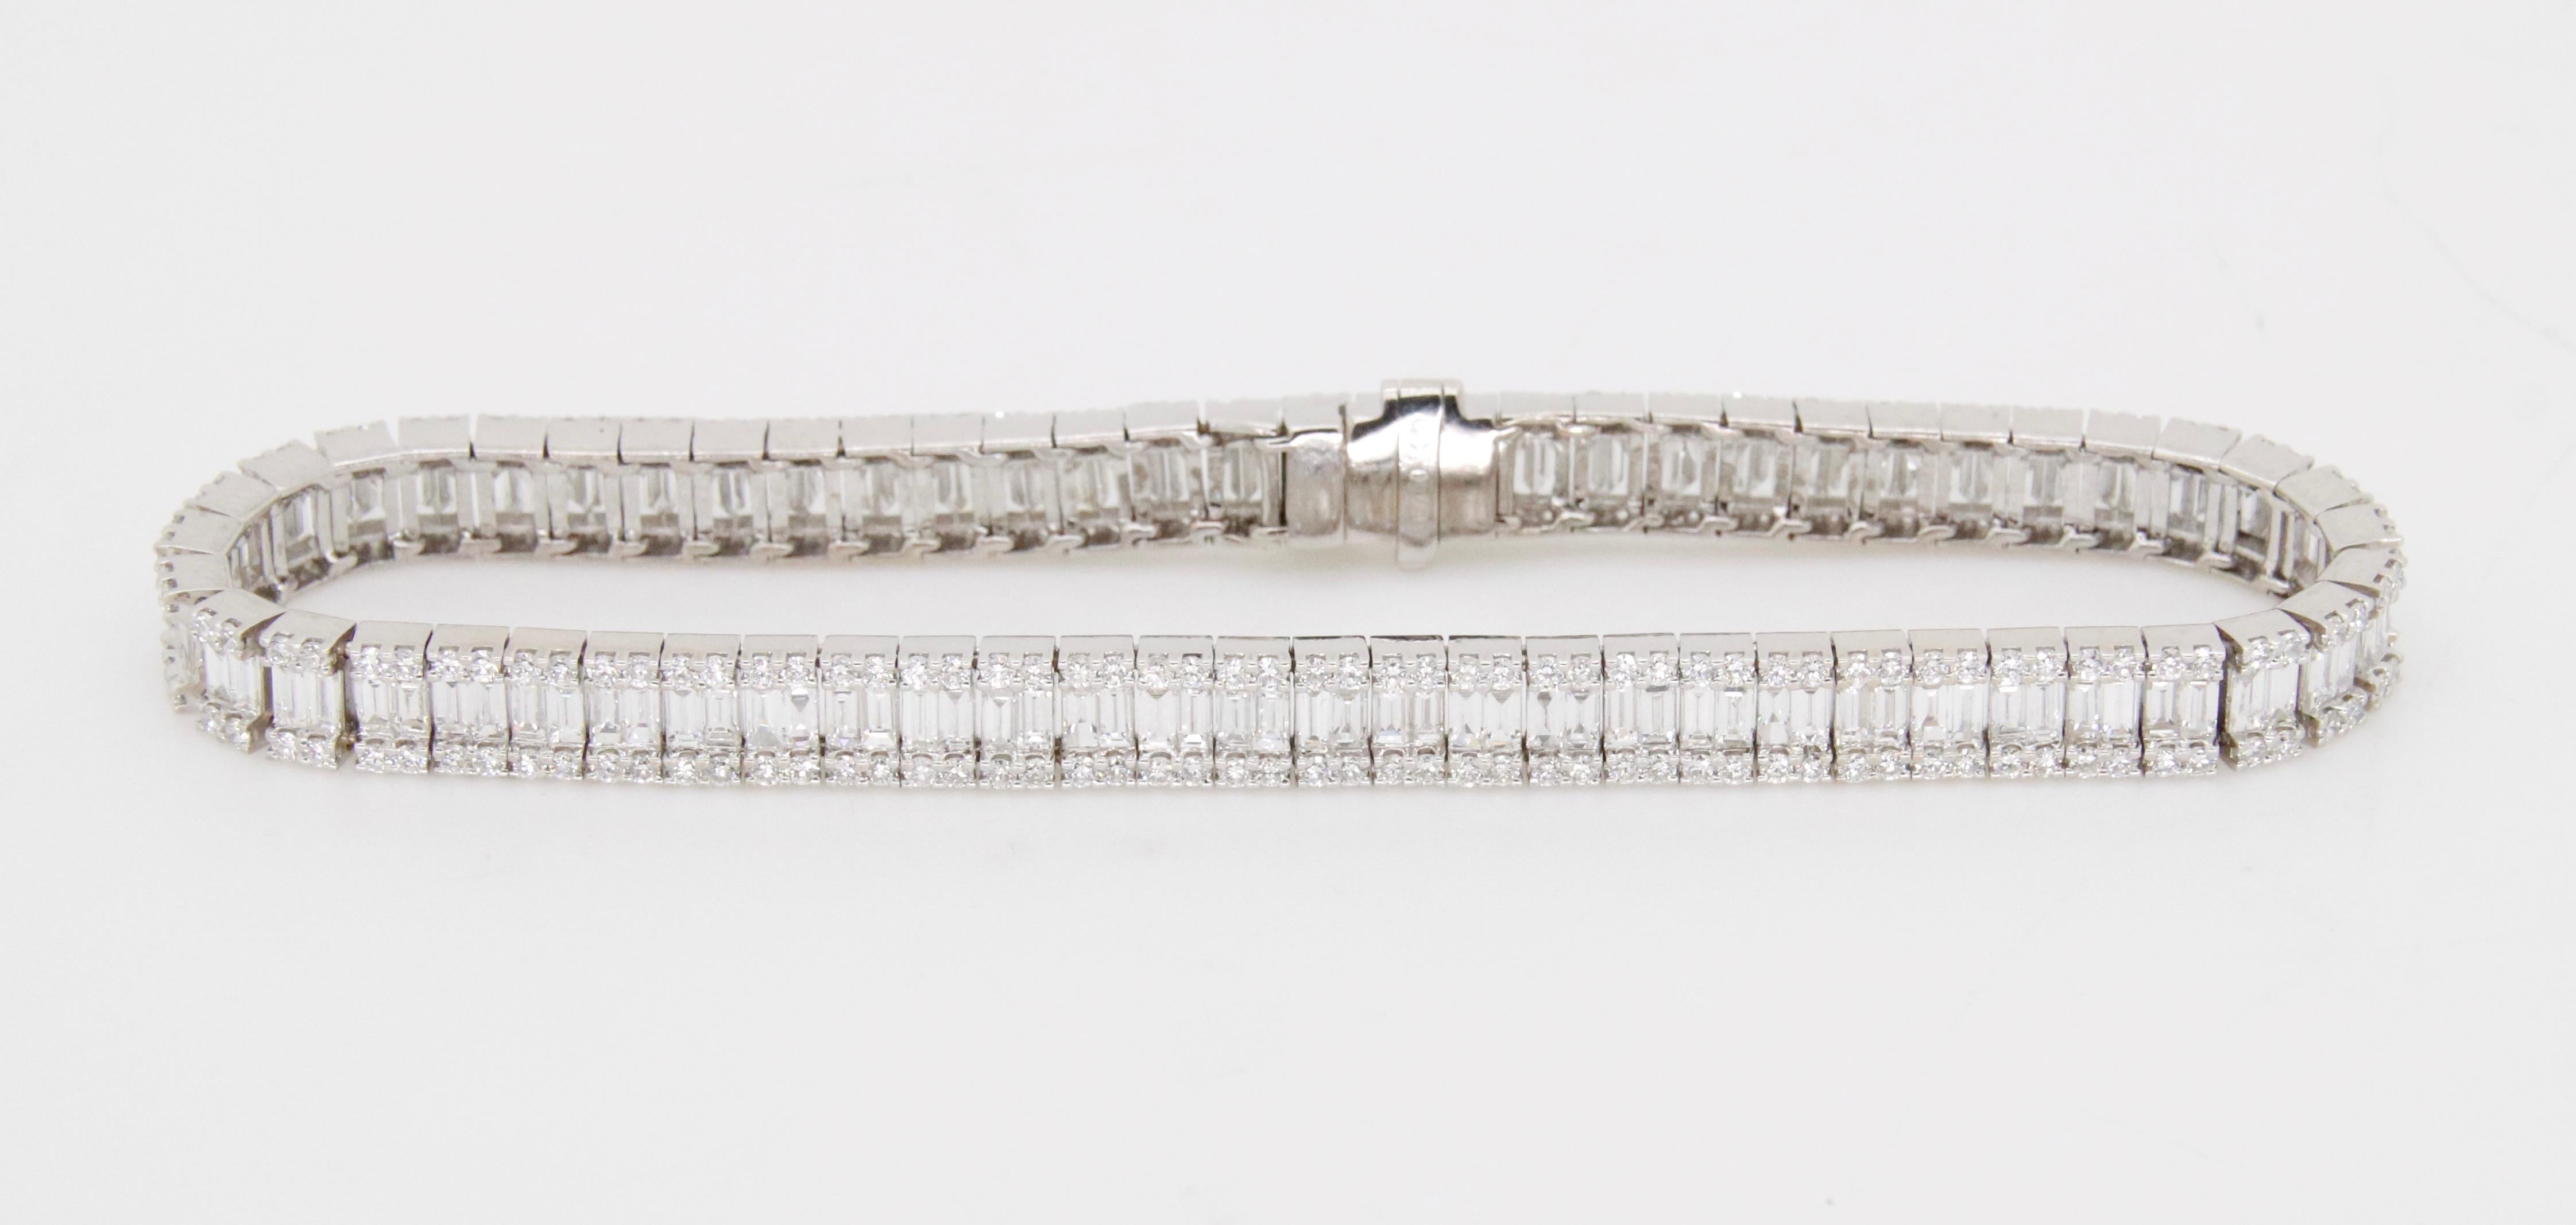 Stunning 7.44CTW diamond bracelet made with Baguette and Round Brilliant cut diamonds made in 18k white gold. 

Diamond Carat Weight: Approximately 7.44CTW
Diamond Cut: Straight Baguette & Round Brilliant Cut     
Color: Average: E-G
Clarity: